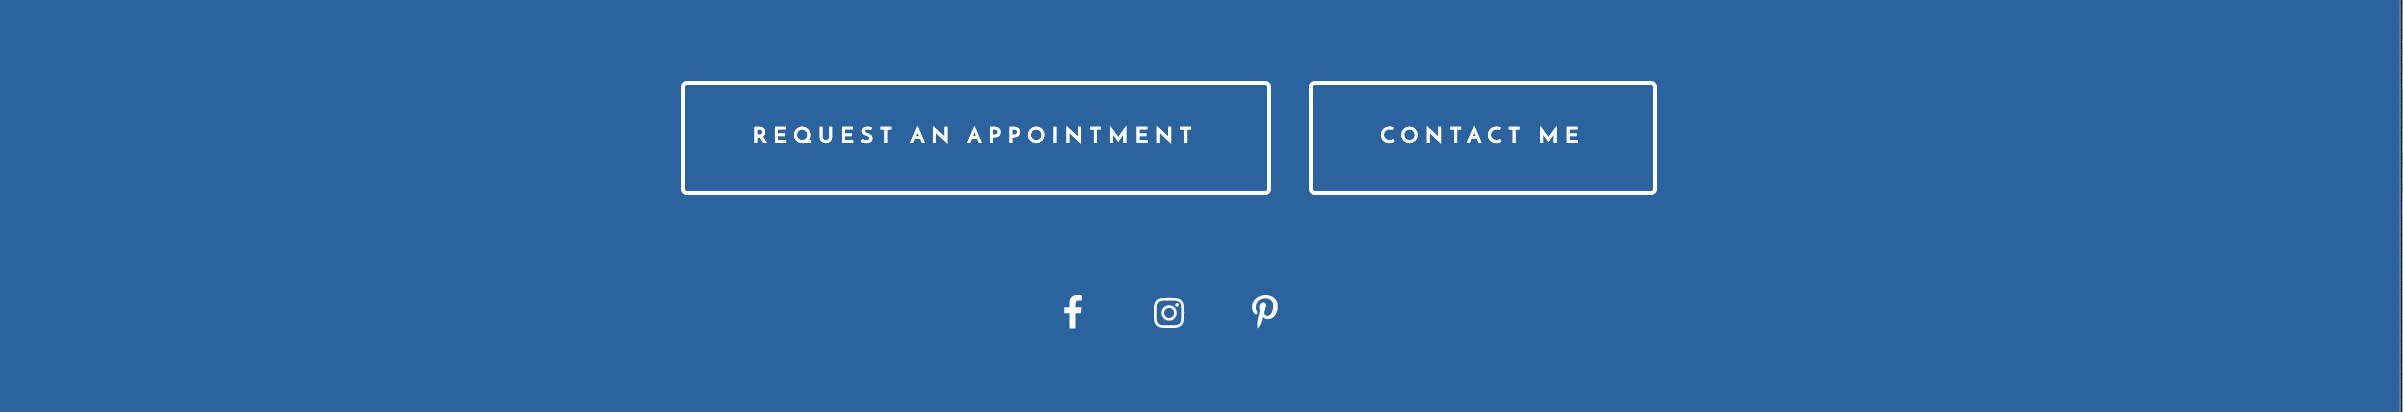 Simple footer | New Therapist Website Theme: Denver | Brighter Vision Web Solutions | Custom Websites for Therapists